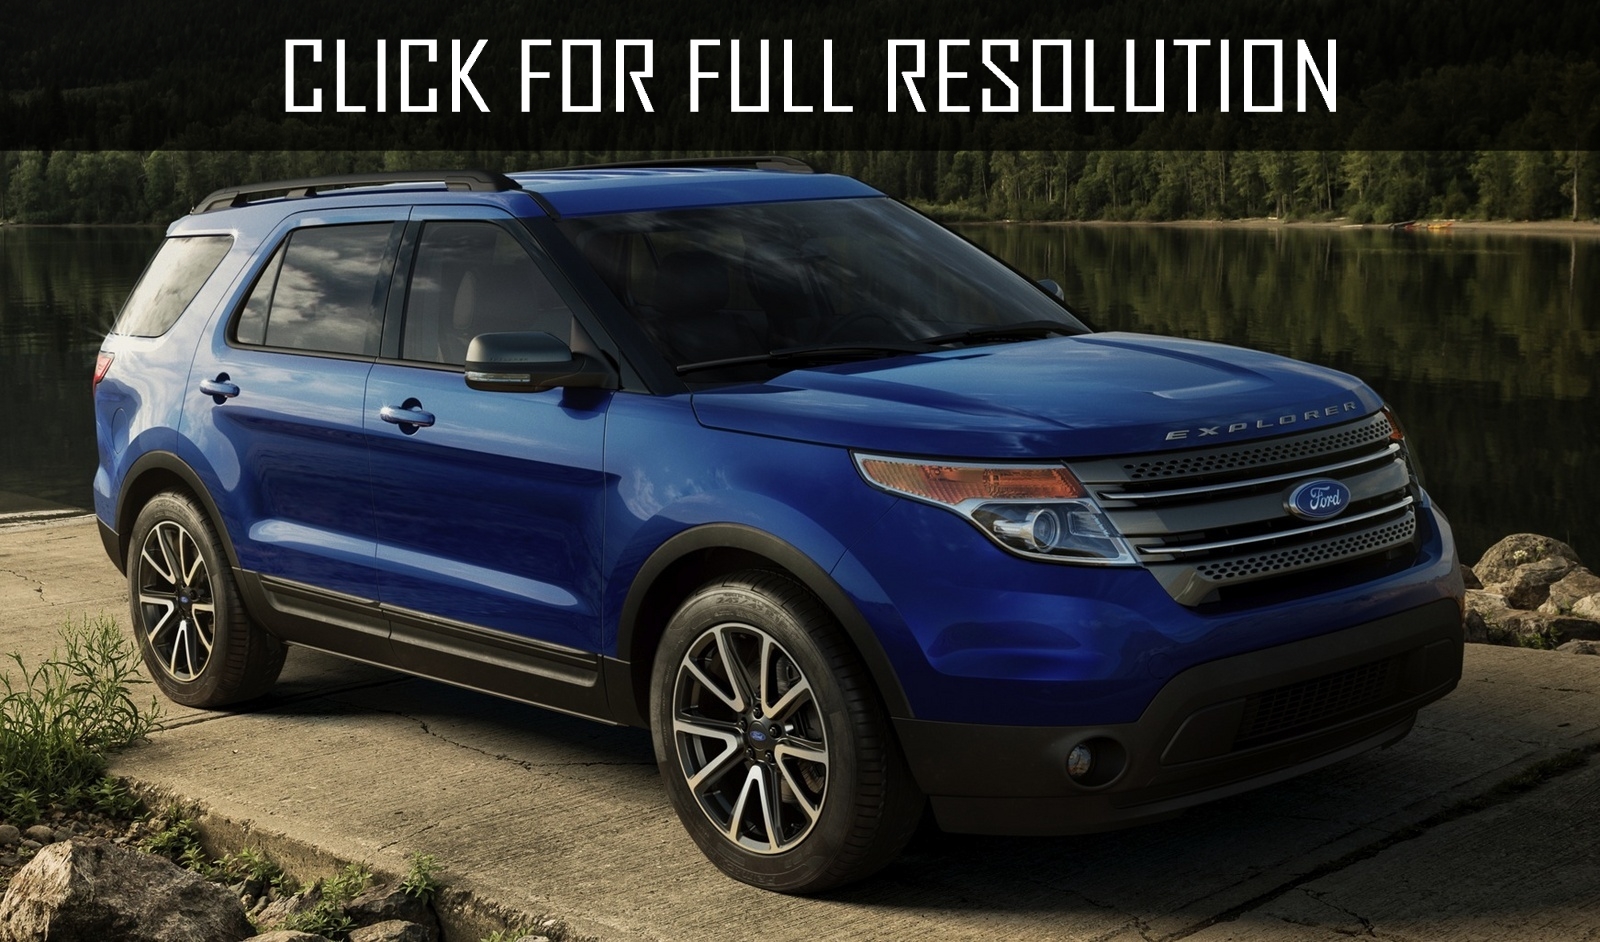 Ford Explorer 8 Seater amazing photo gallery, some information and